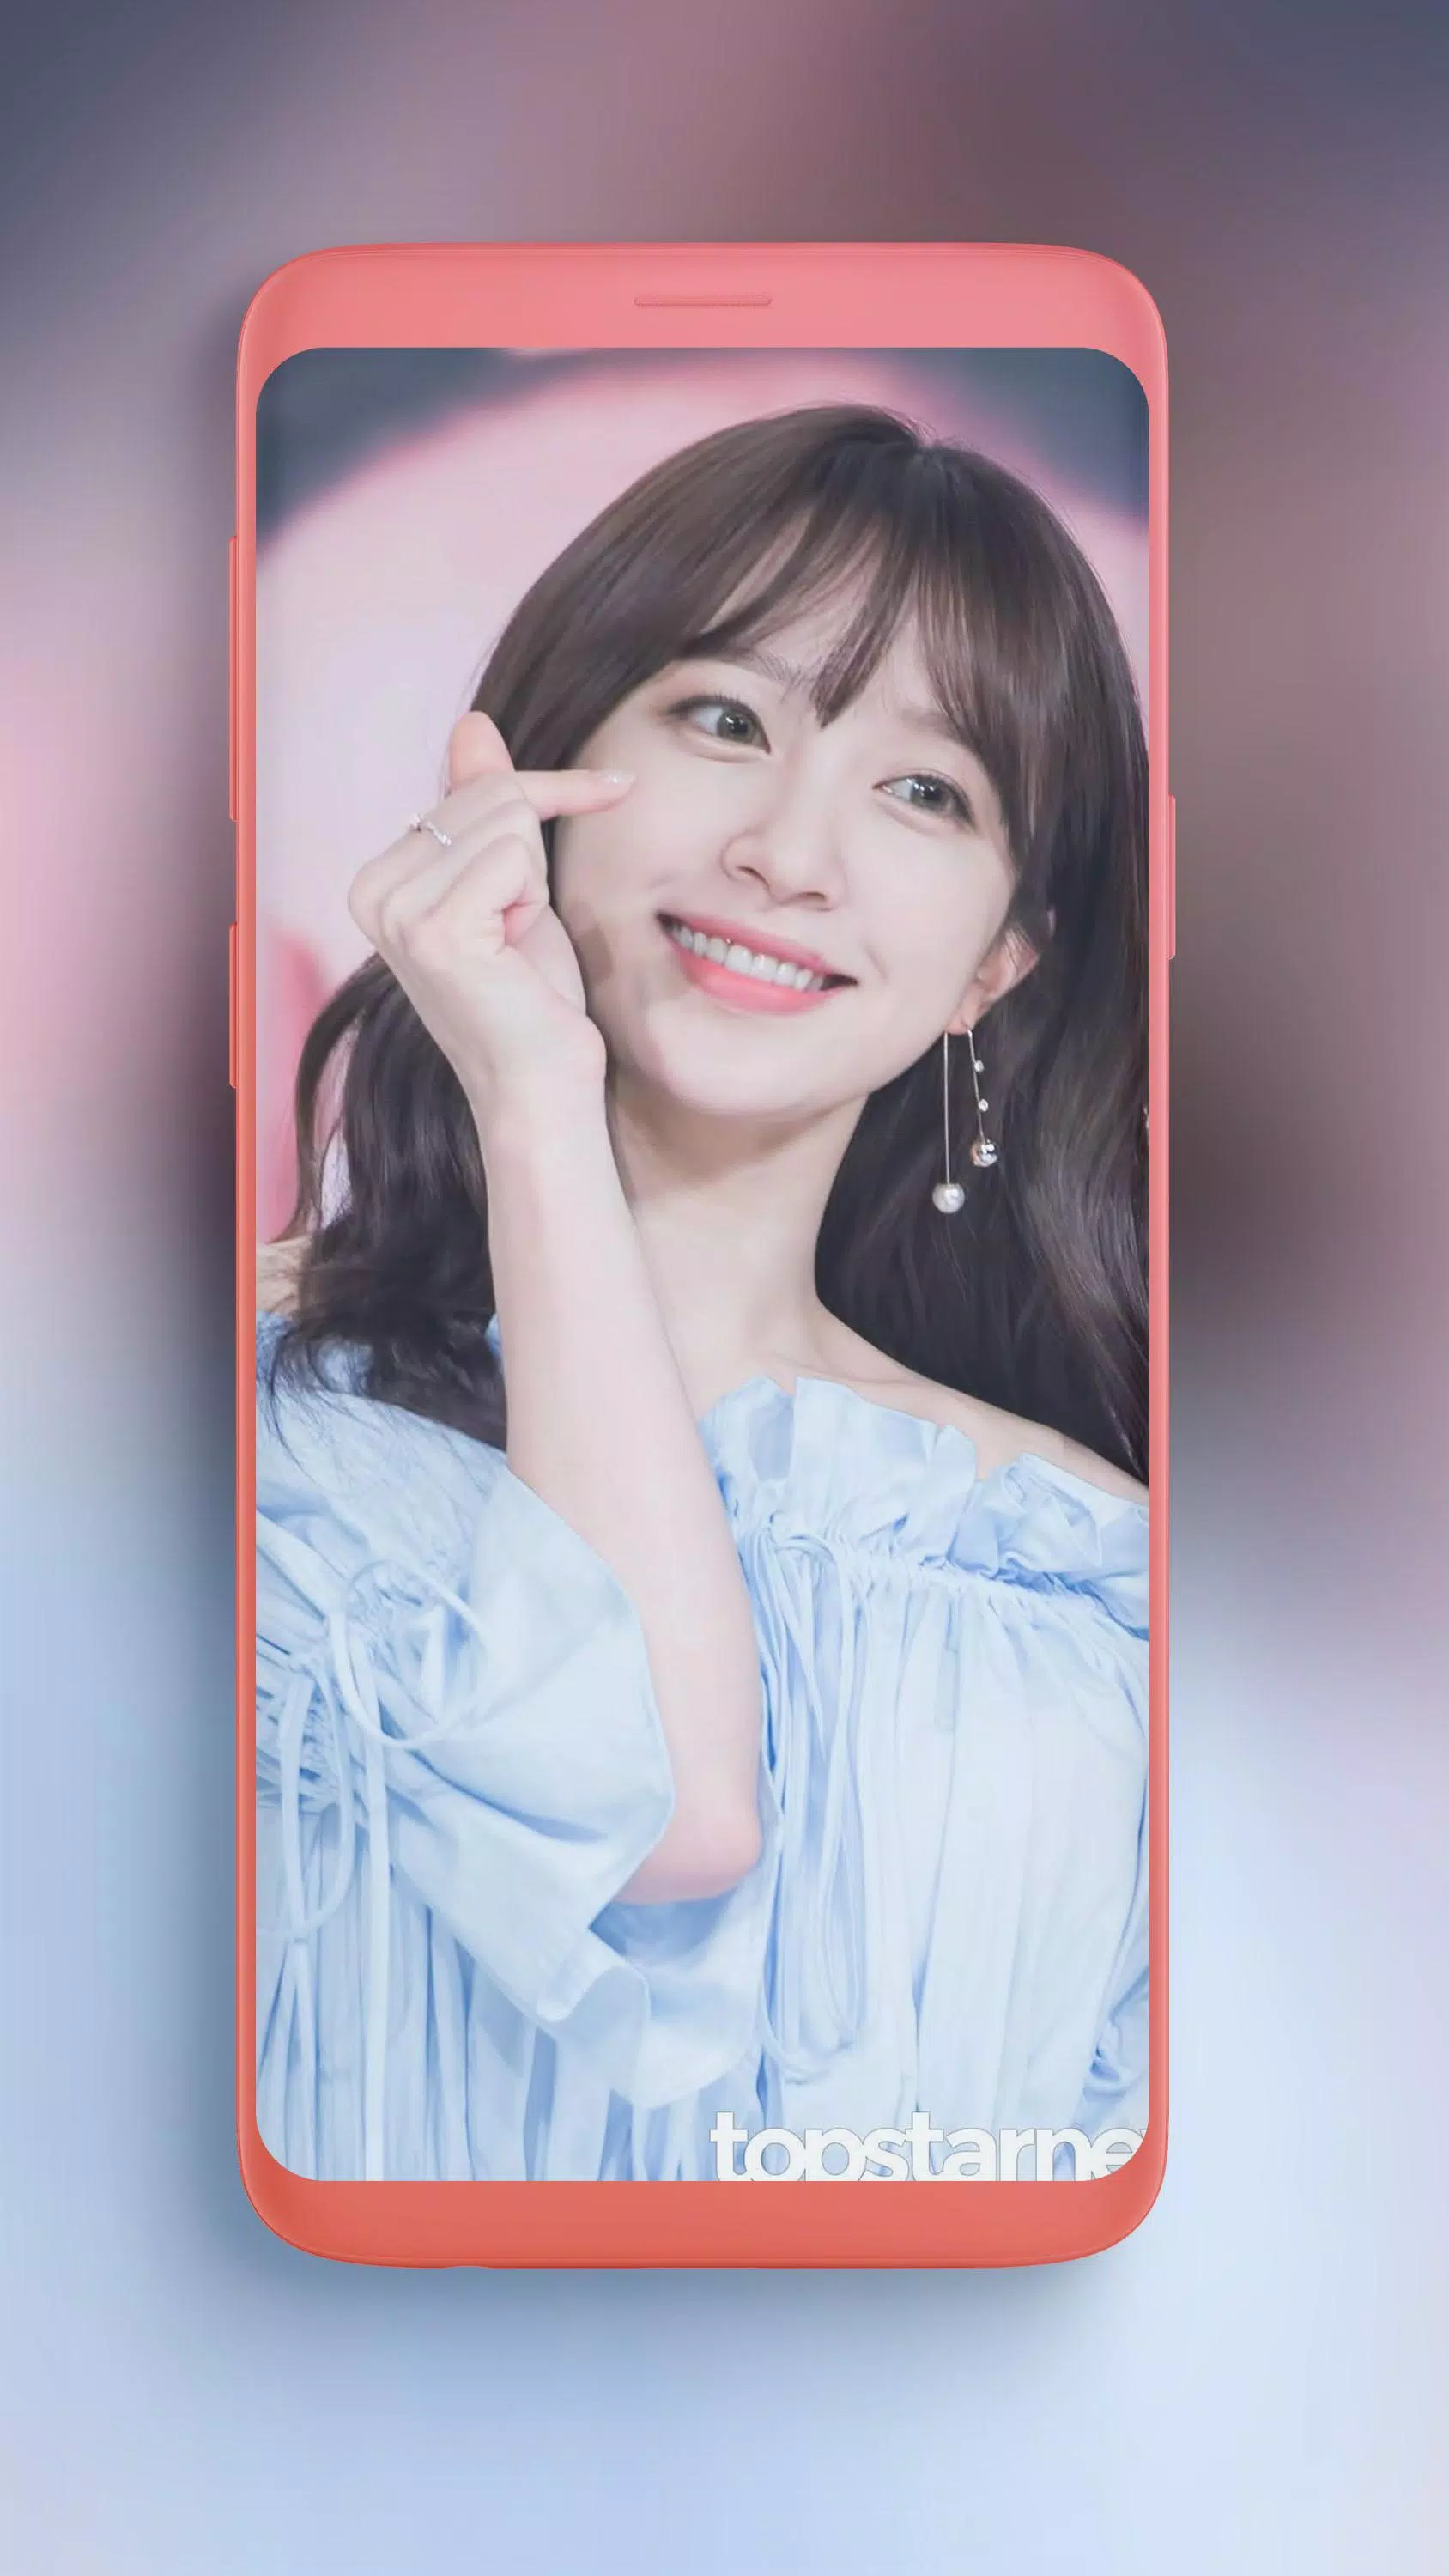 Exid Hani Wallpaper Kpop Hd New For Android Apk Download